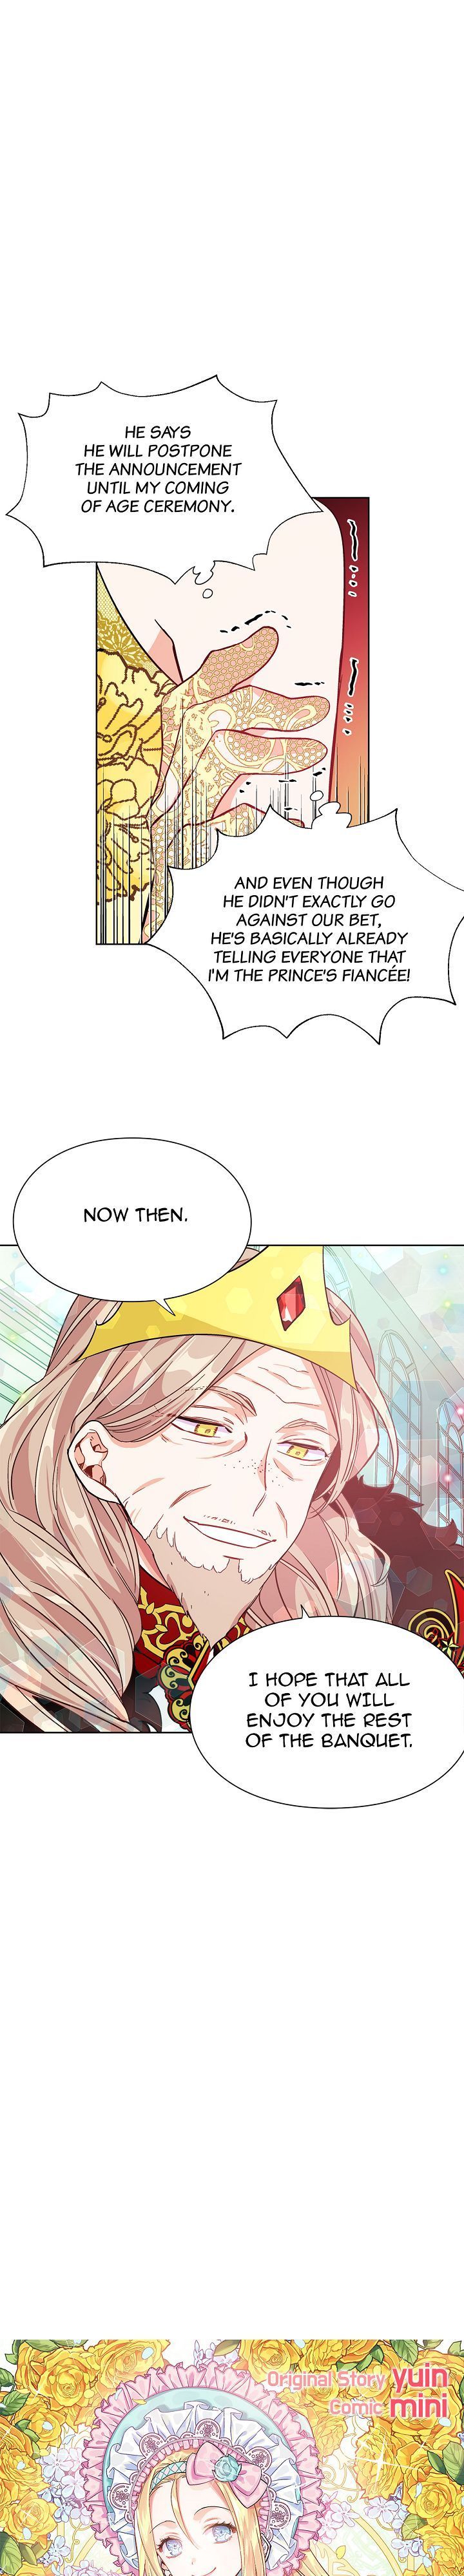 Doctor Elise: The Royal Lady With The Lamp Chapter 34 - Ch.034